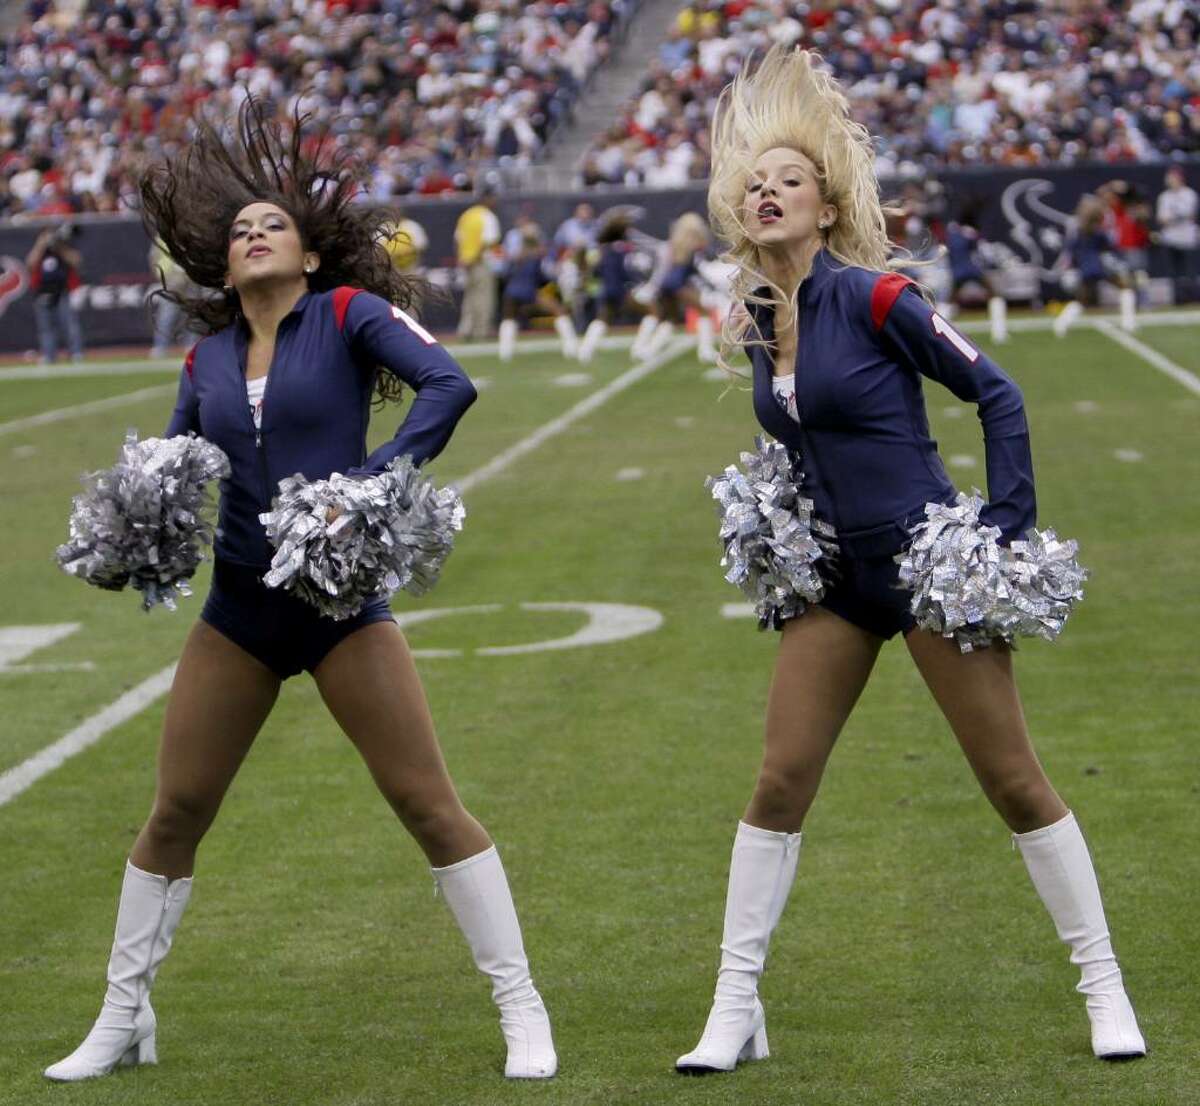 HOUSTON - DECEMBER 13: Houston Texans cheerleaders perform during the game against the Seattle Seahawks at Reliant Stadium on December 13, 2009 in Houston, Texas. (Photo by Bob Levey/Getty Images)